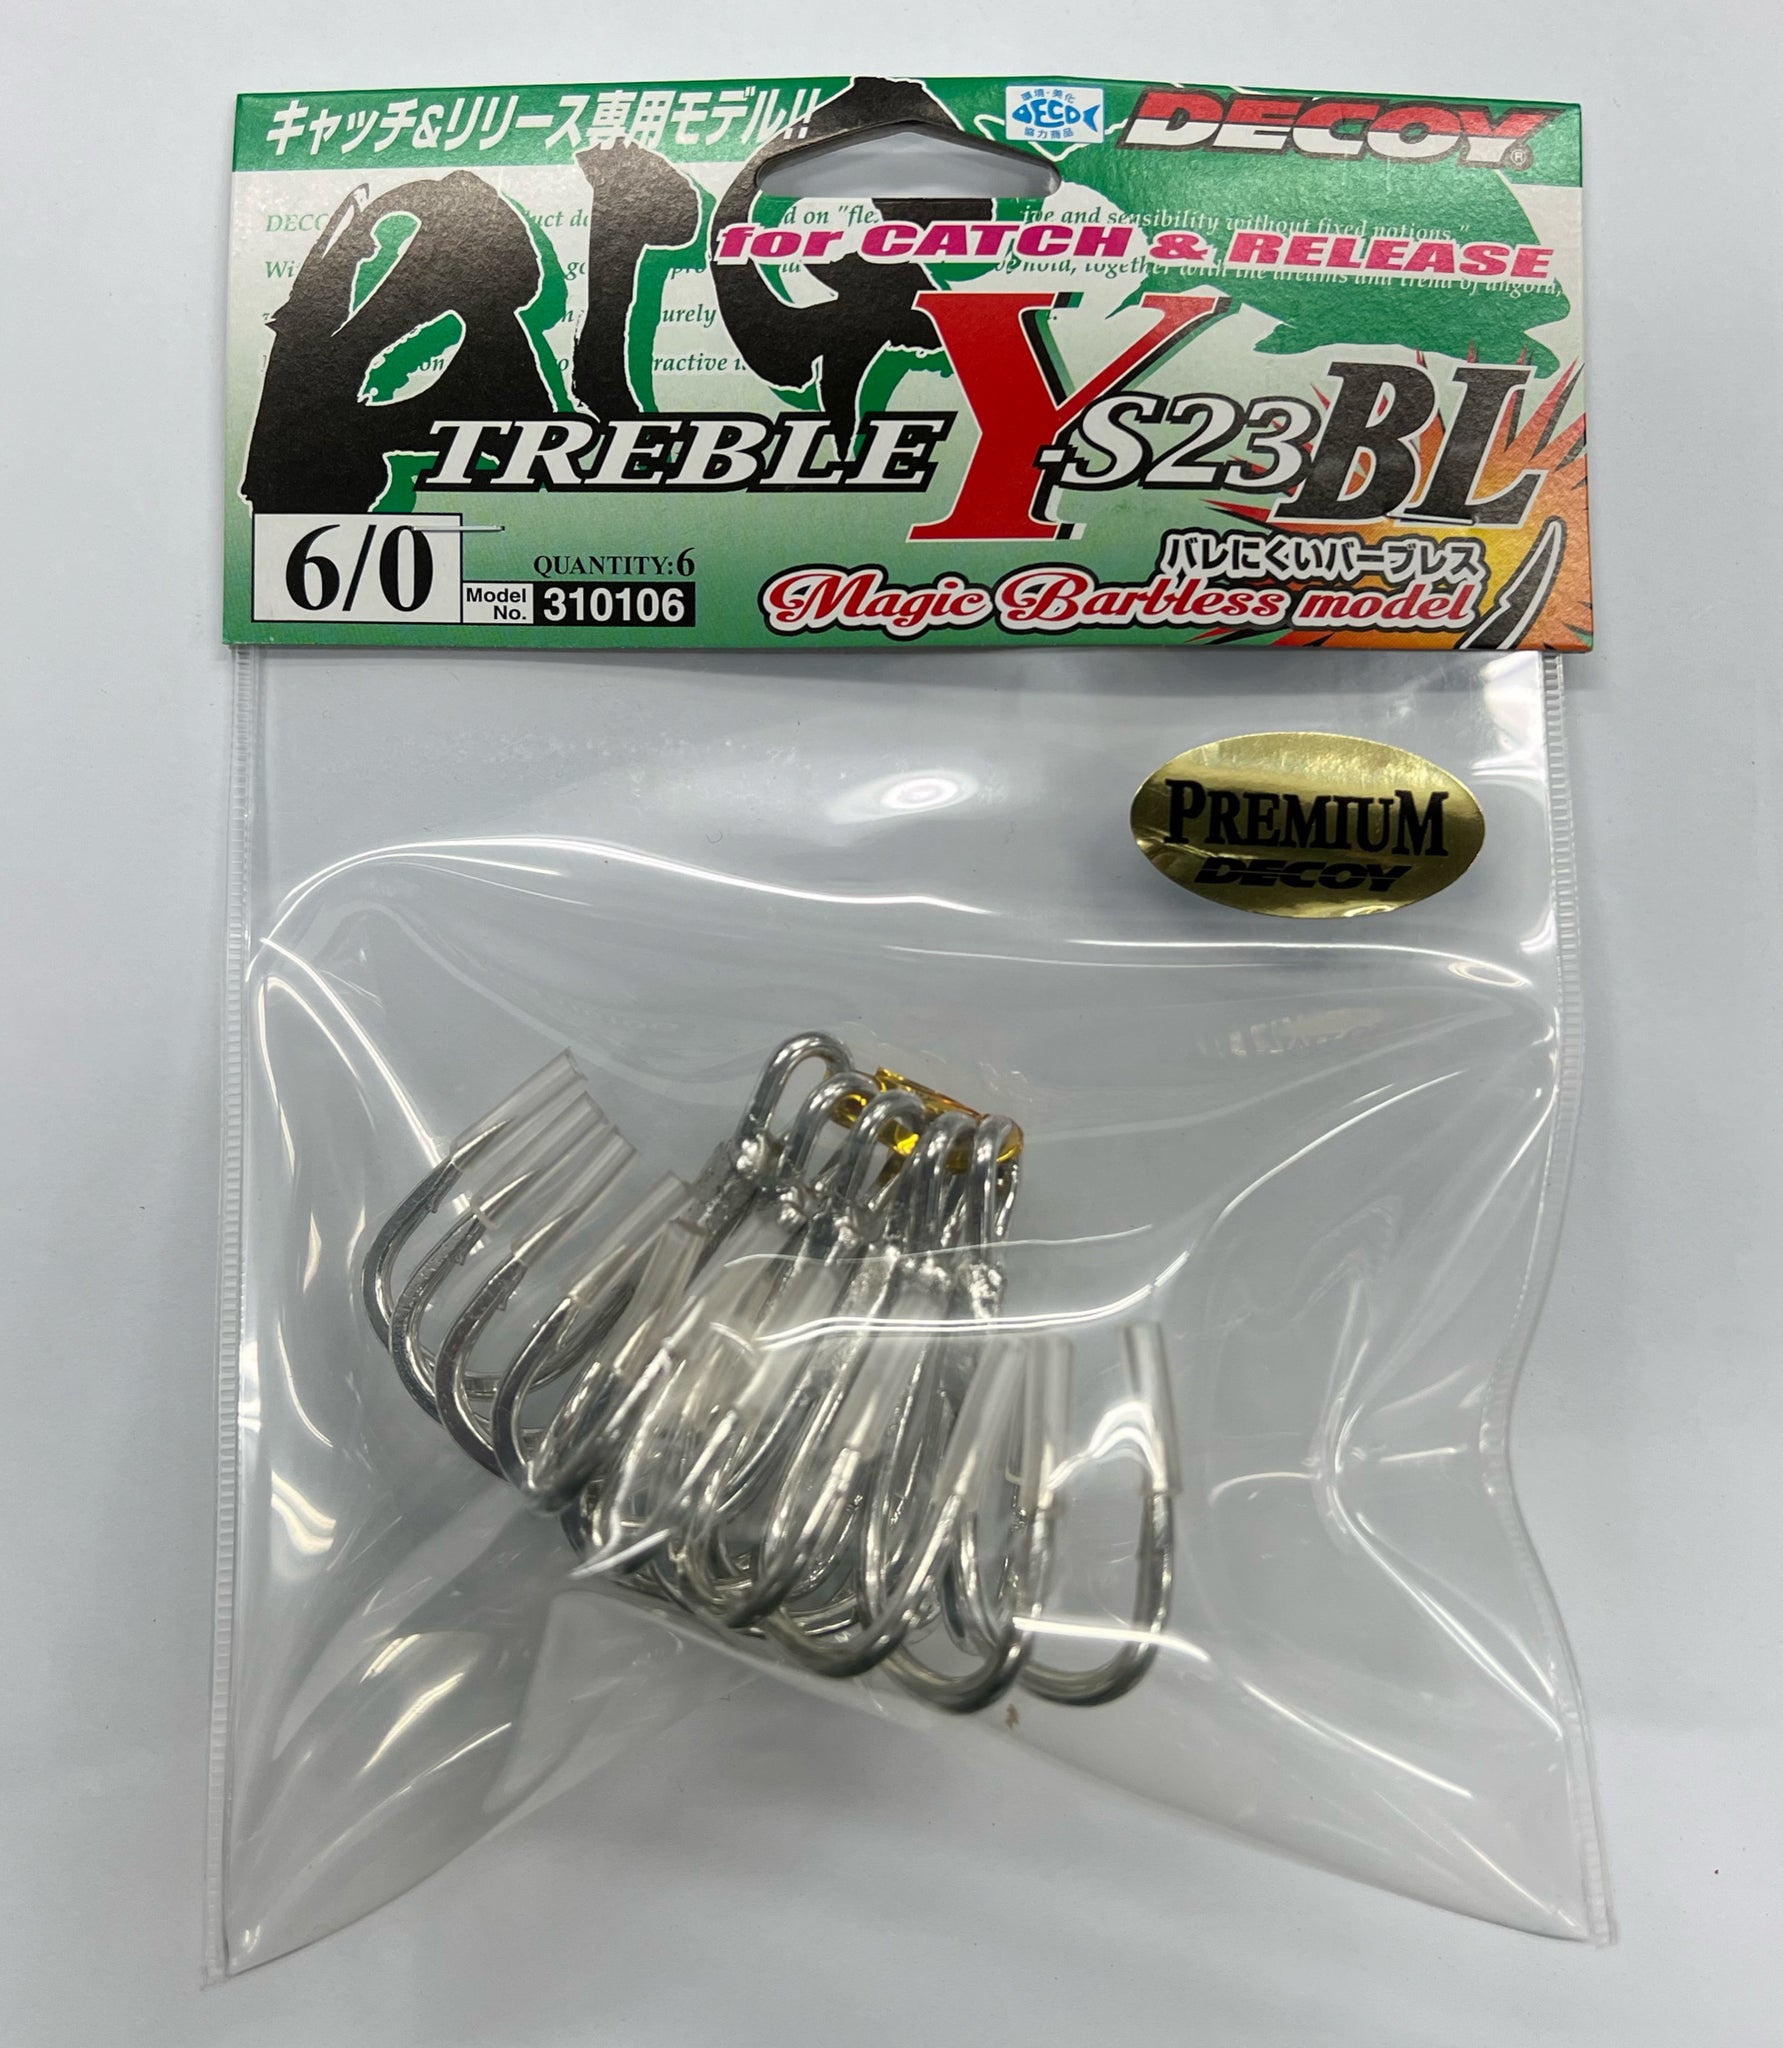 DECOY TREBLE HOOKS Y-S23BL Barbless (Made in Japan) – Anglers